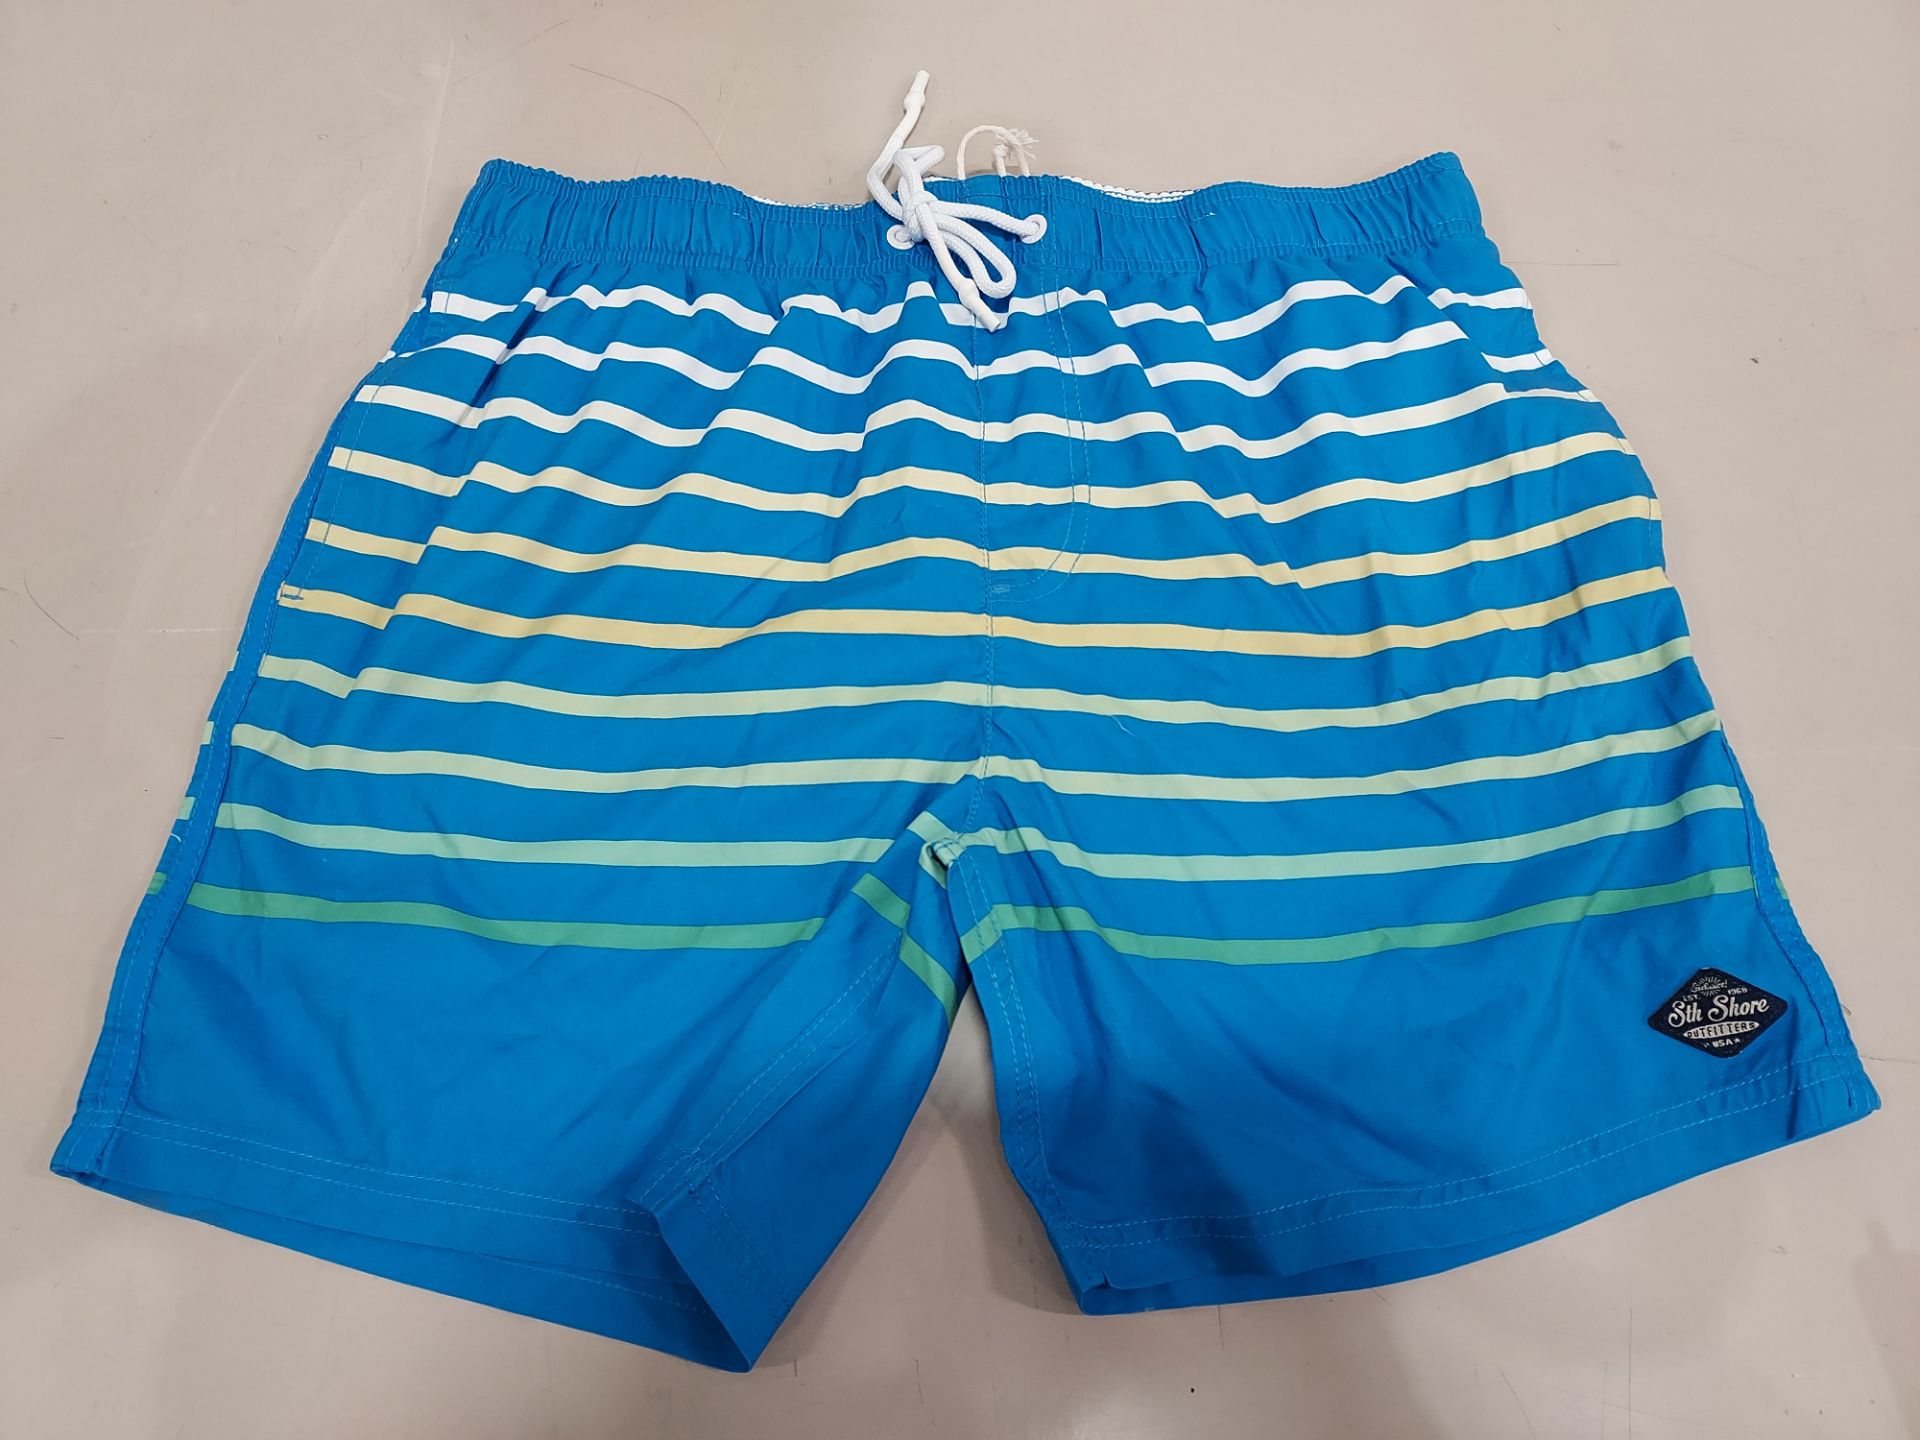 12 X BRAND NEW SOUTH BEACH MEN'S SWIM SHORTS IN BLUE WITH STRIPES SIZES 6 L AND 6 XL - RRP TOTAL £